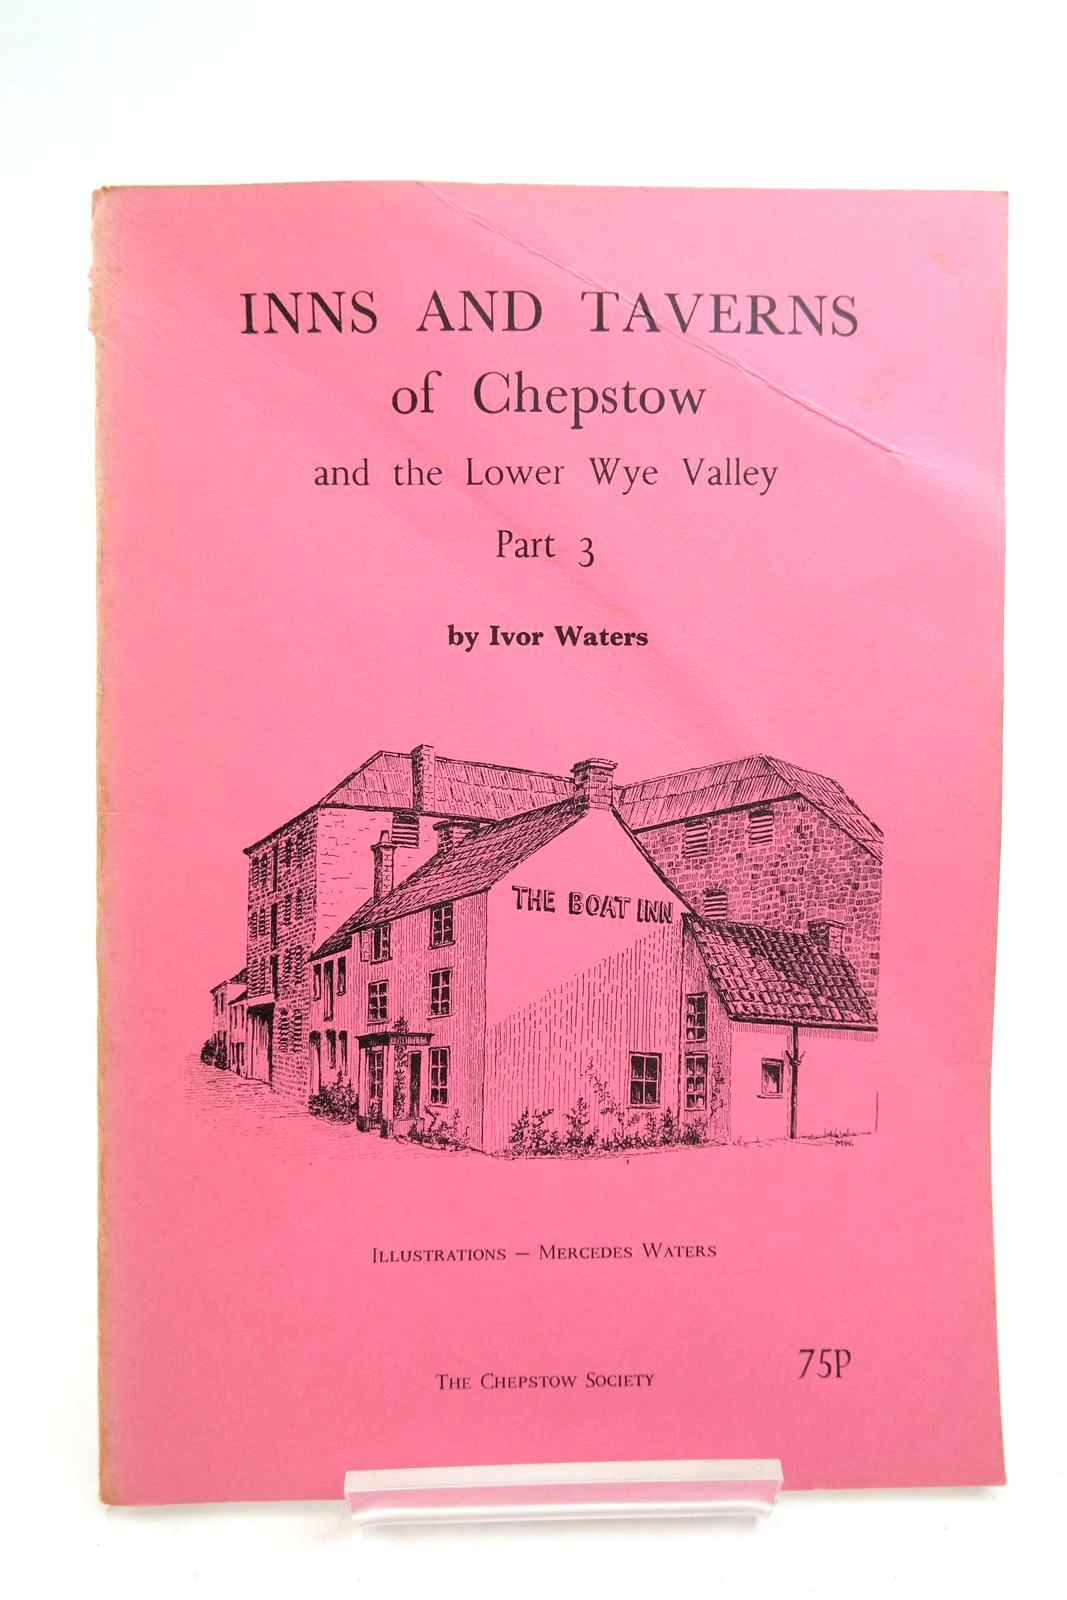 Photo of INNS AND TAVERNS OF CHEPSTOW AND THE LOWER WYE VALLEY PART 3 written by Waters, Ivor illustrated by Waters, Mercedes published by The Chepstow Society (STOCK CODE: 2140174)  for sale by Stella & Rose's Books